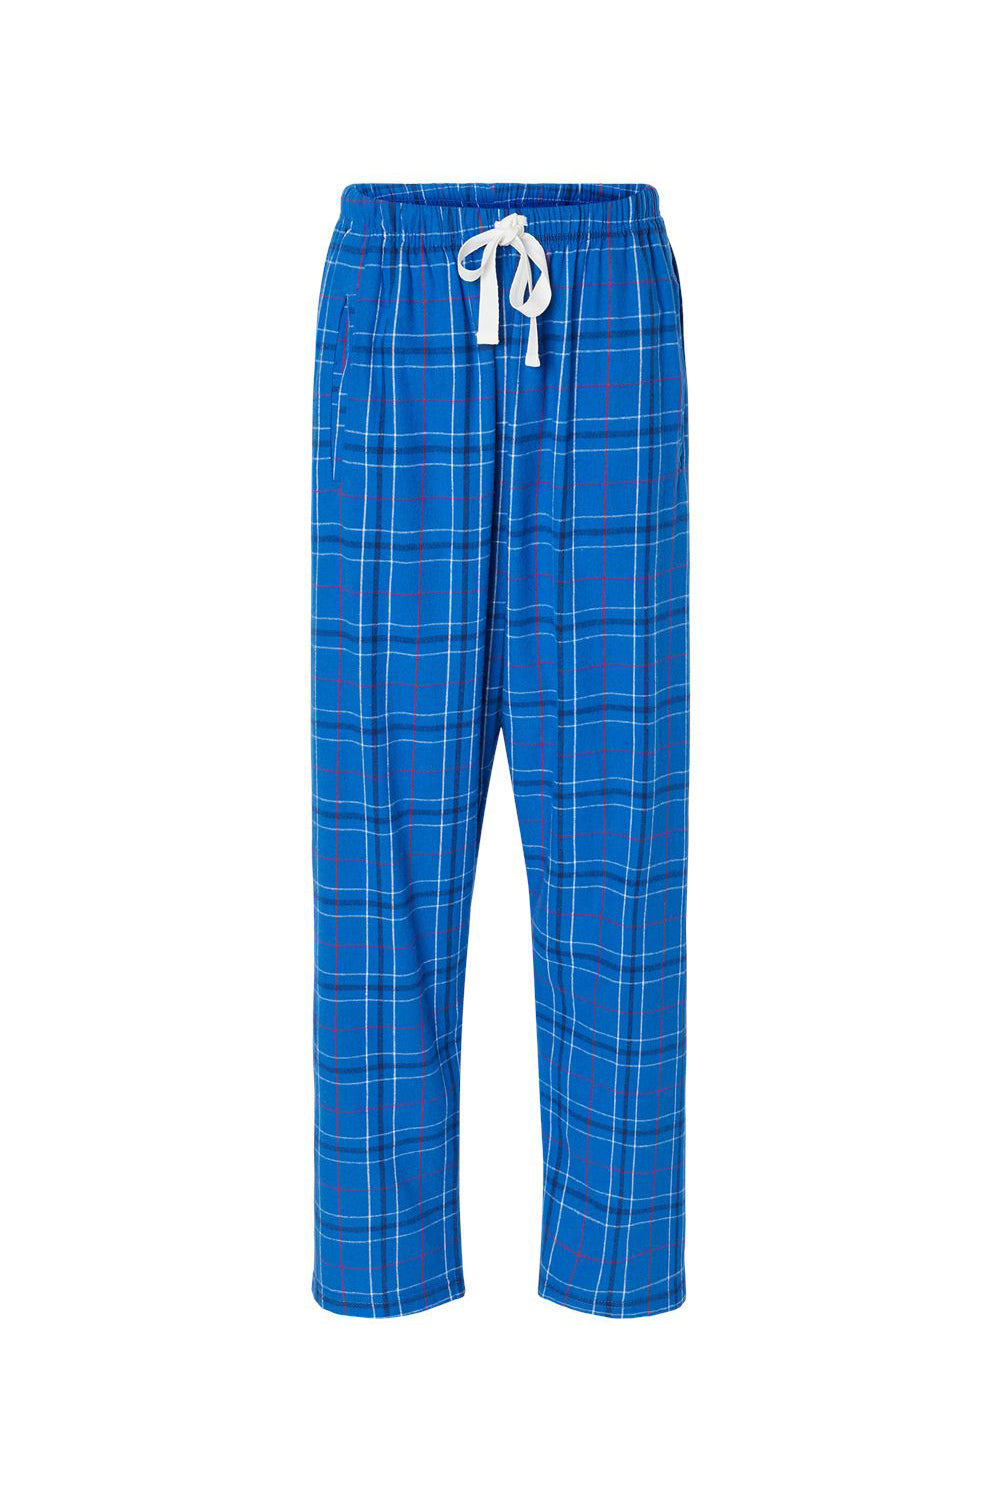 Boxercraft BW6620 Womens Haley Flannel Pants Royal Blue Field Day Plaid Flat Front